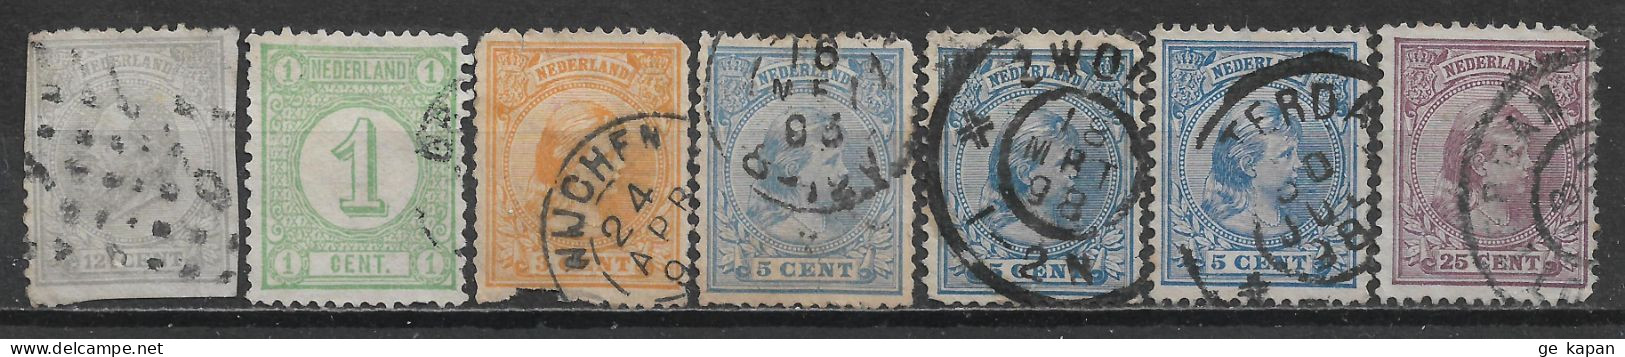 1875-1894 NETHERLANDS Set Of 7 Used Stamps (Michel # 22D,31aD,34a,35ab,35b,42b) CV €11.10 - Usati